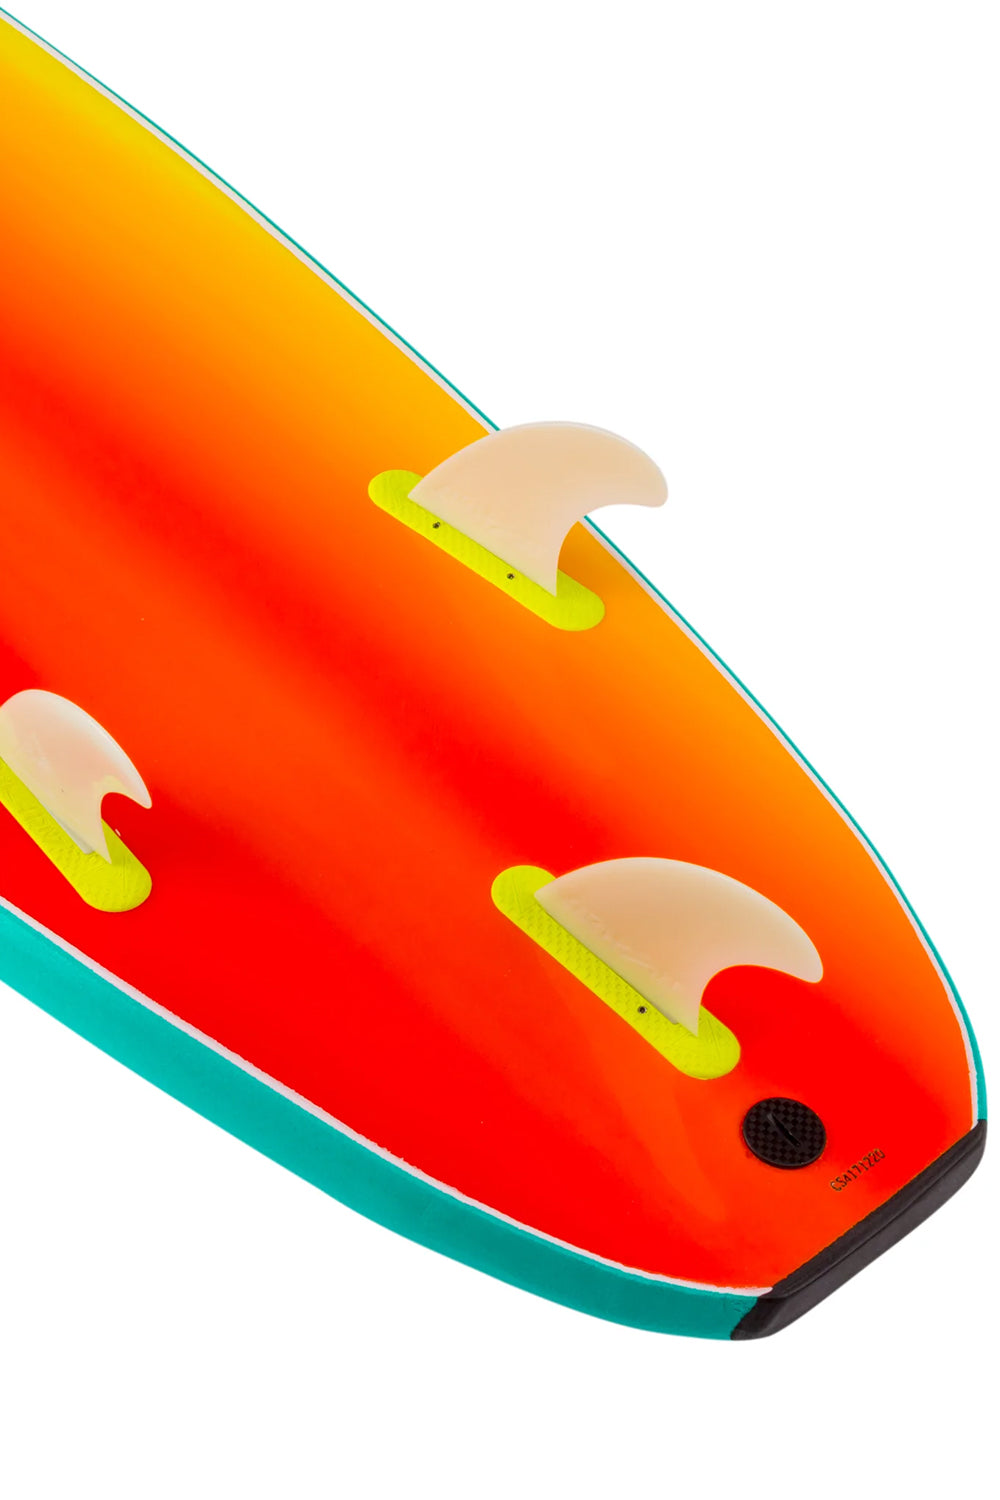 8’0 Catch Surf Odysea Log Softboard - Comes with fins